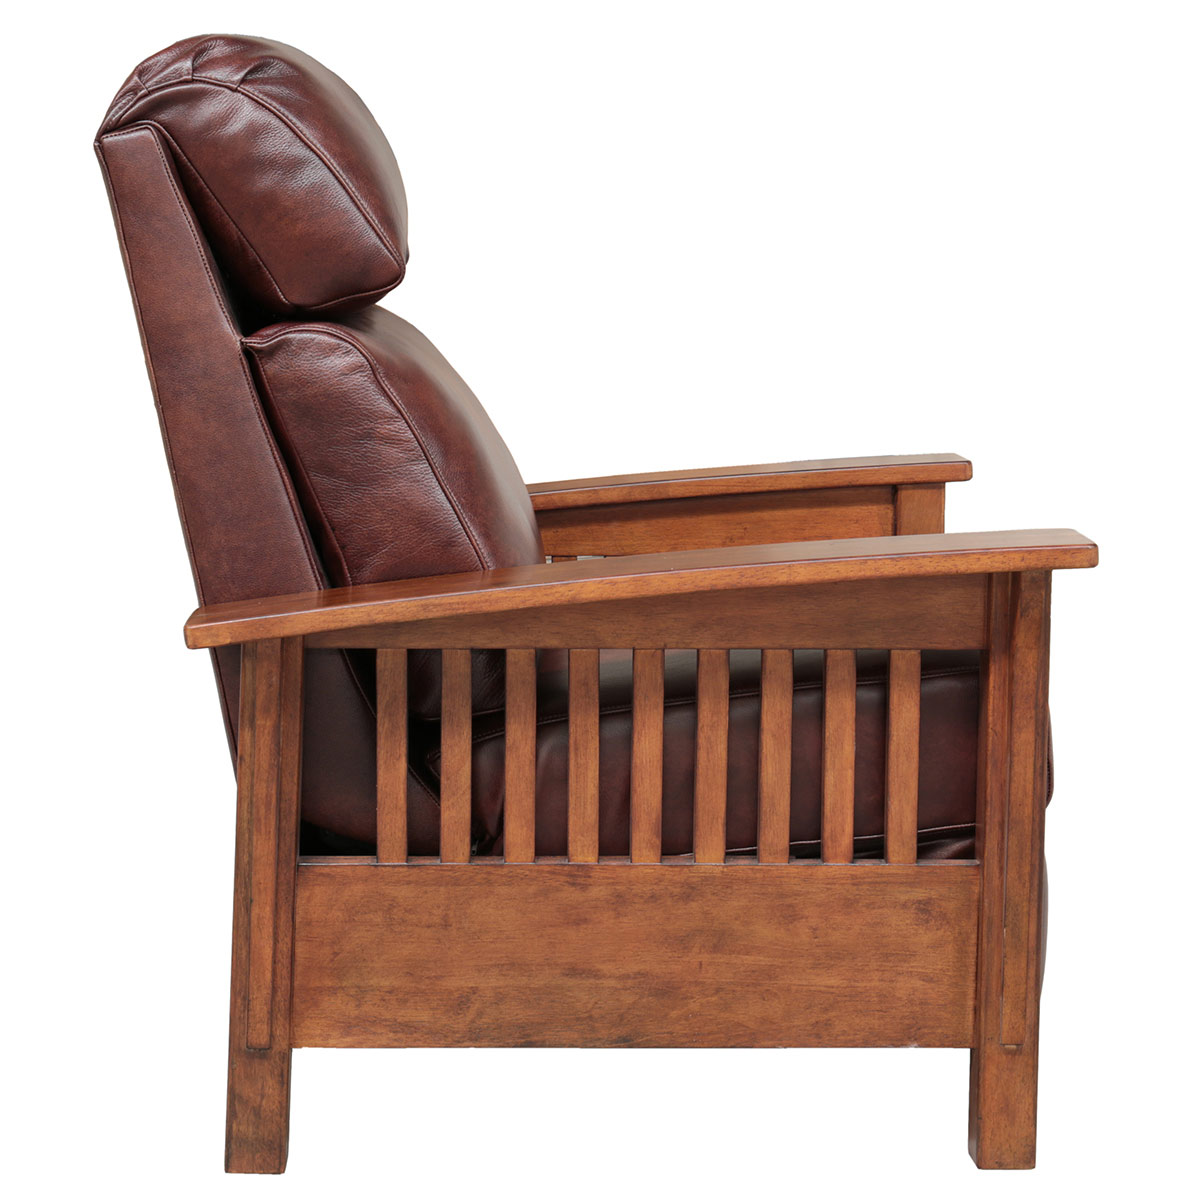 Barcalounger Mission Recliner Chair - Wenlock Fudge/All Leather